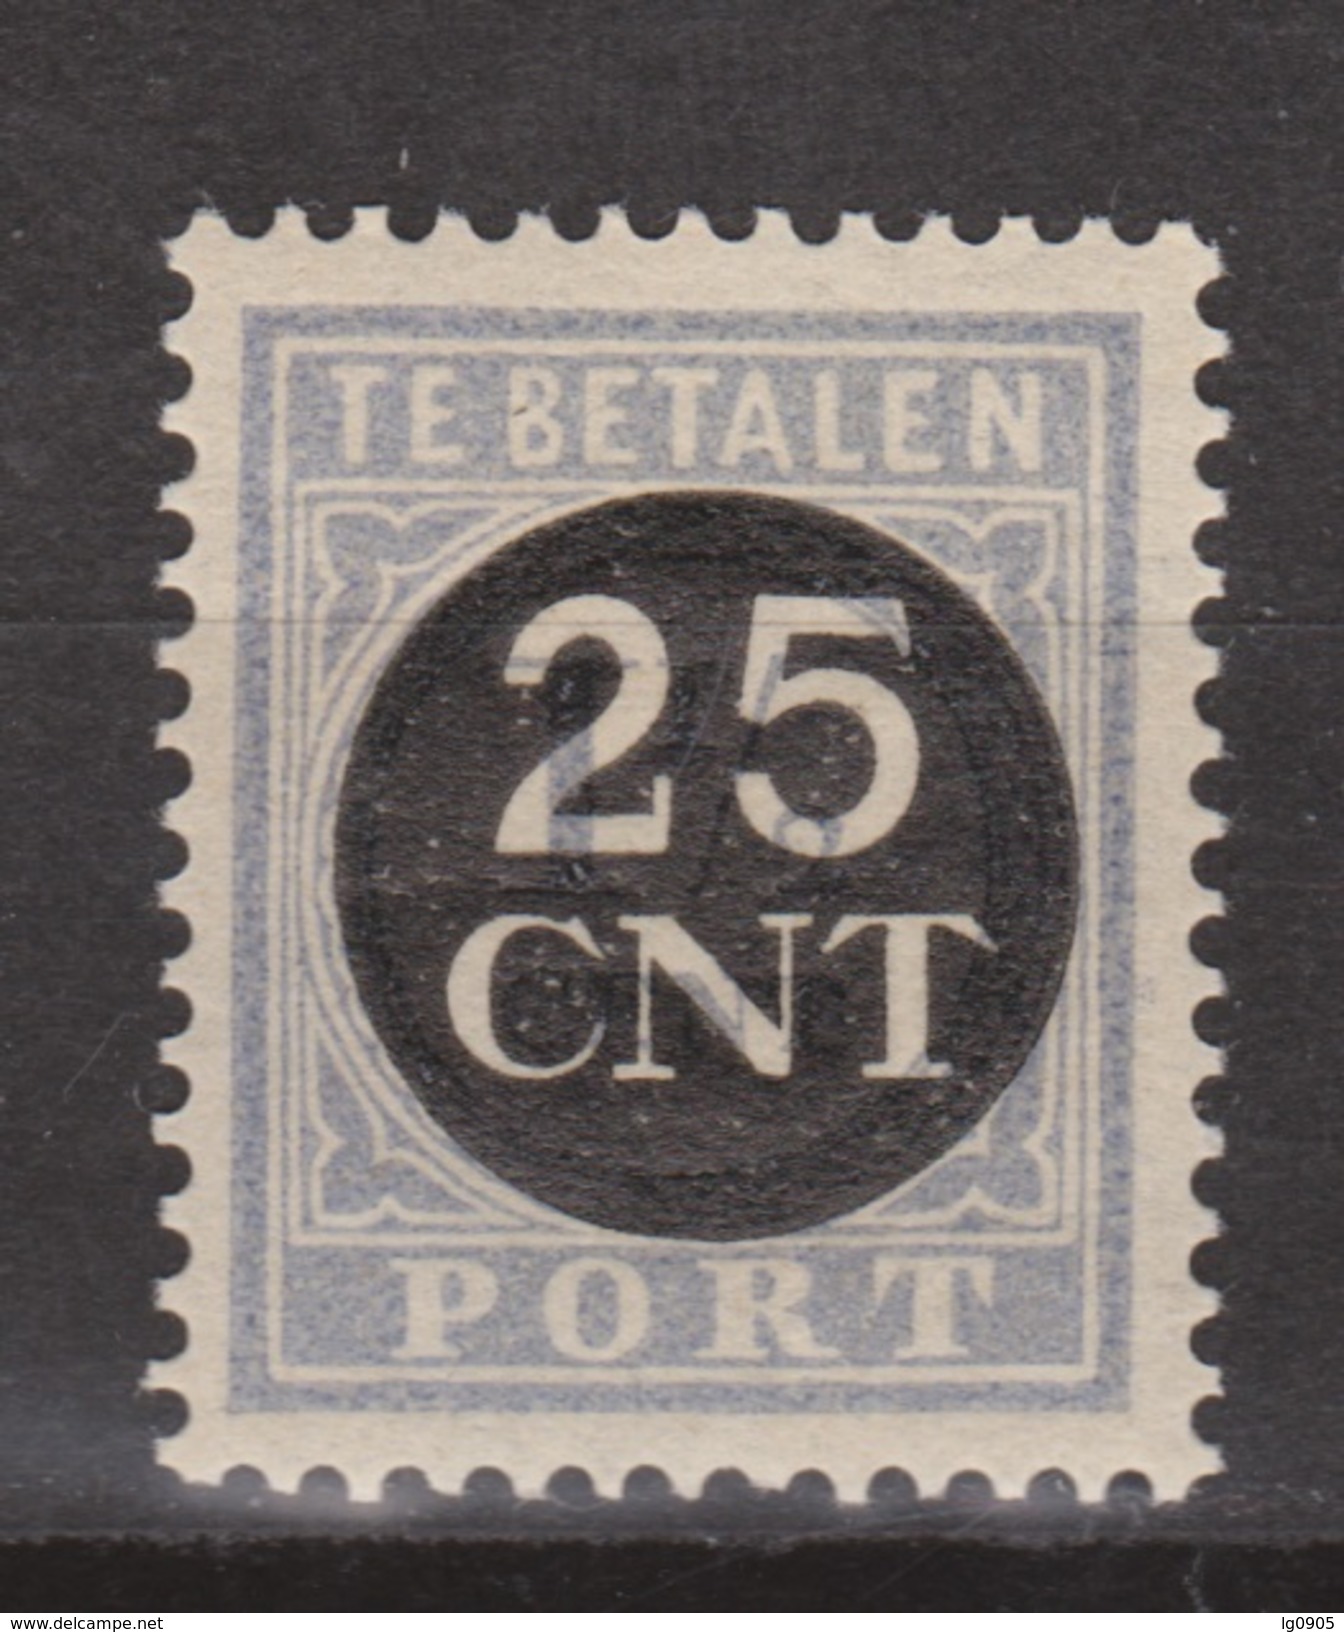 NVPH Nederland Netherlands Holanda Pays Bas Port 63 MLH Timbre-taxe Postmarke Sellos De Correos NOW MANY DUE STAMPS - Impuestos